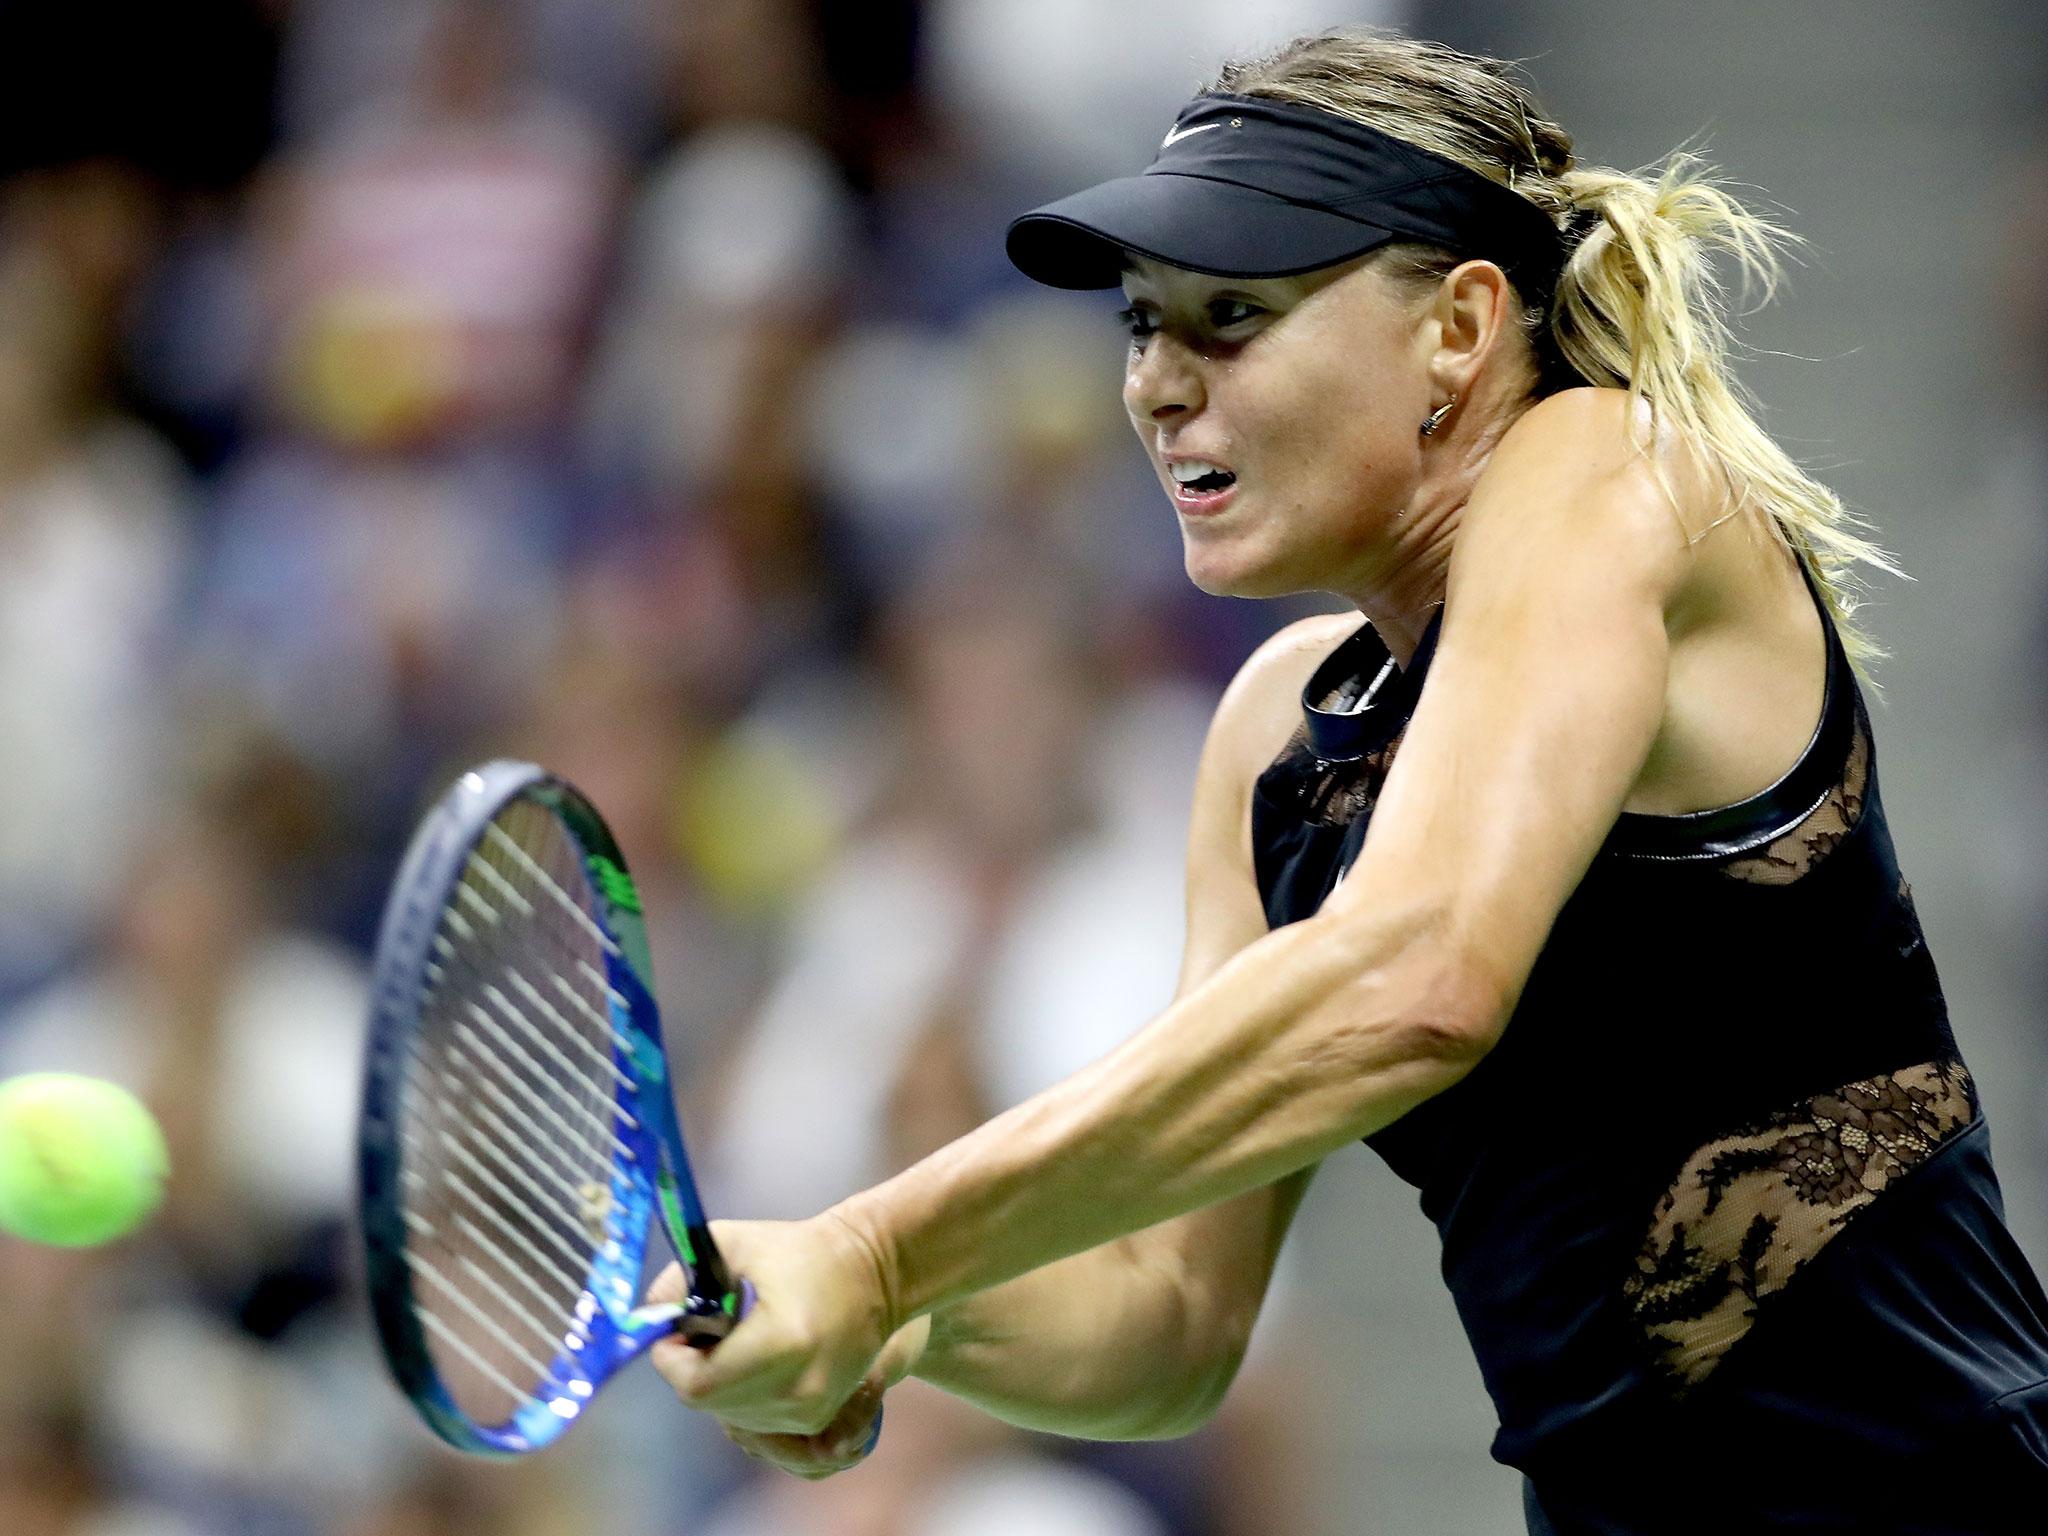 &#13;
Sharapova looked impressive on her first Grand Slam appearance in 19 months &#13;